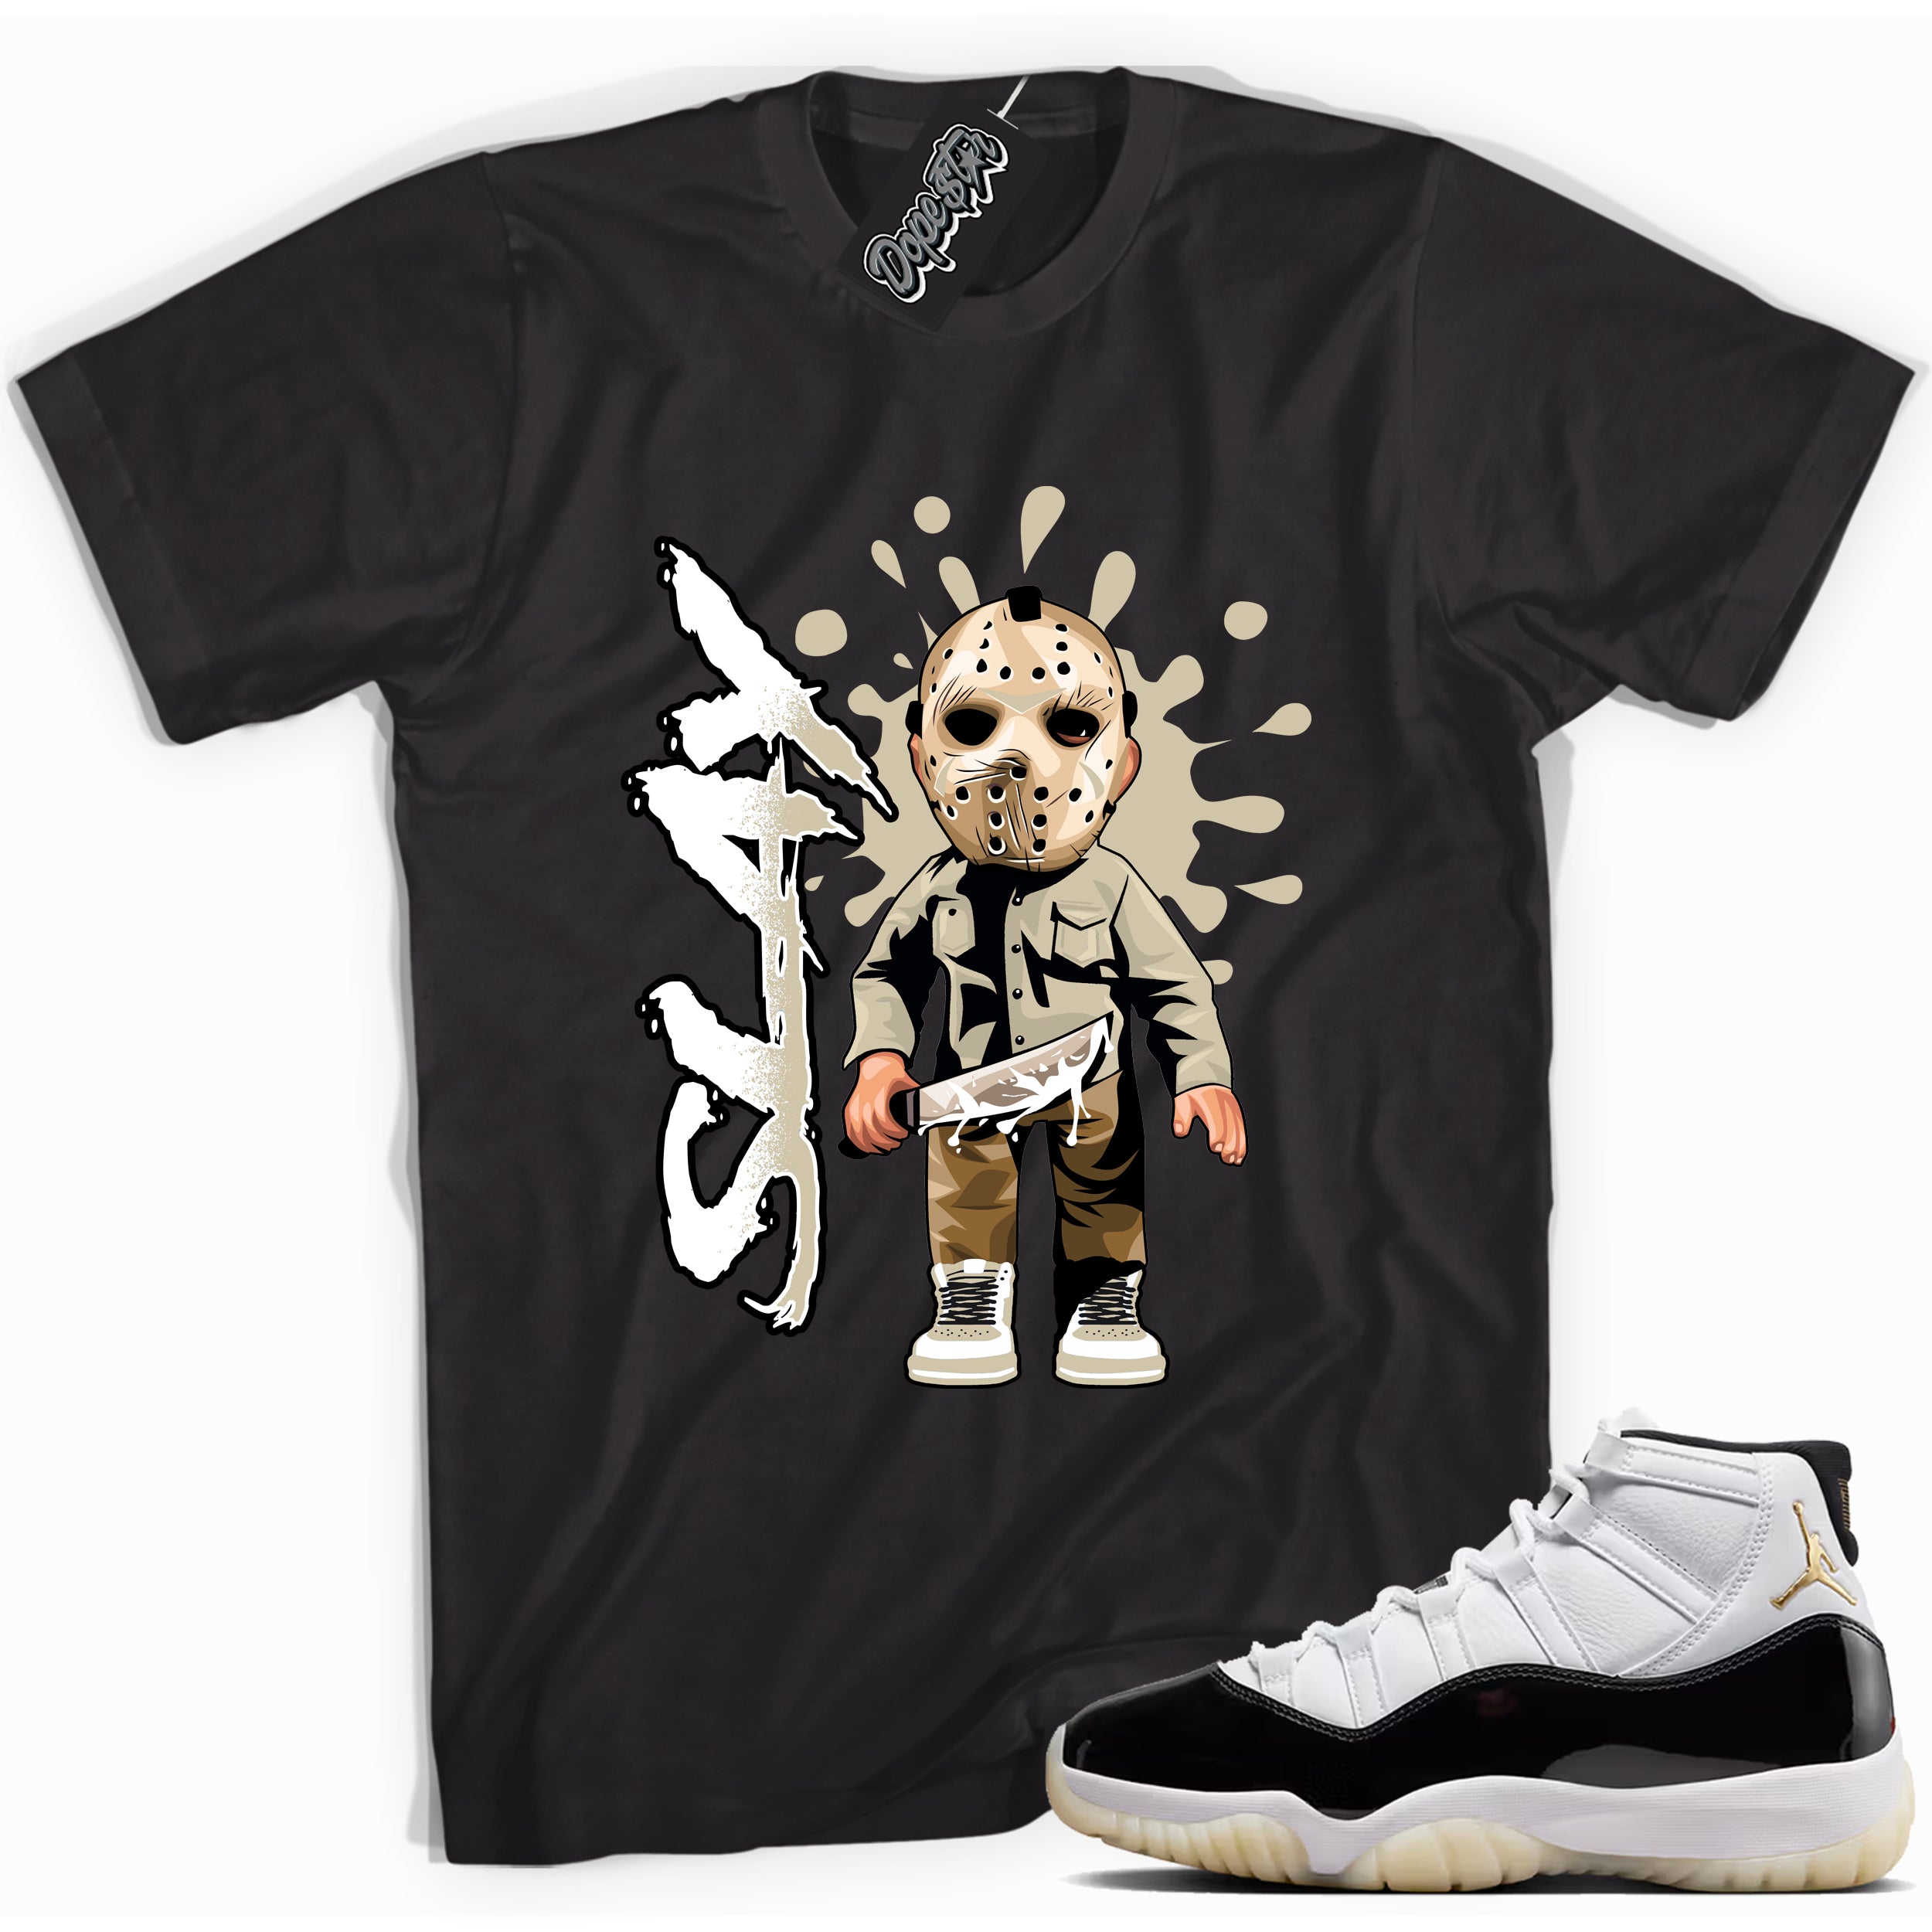 Cool Black graphic tee with “ Slay ” print, that perfectly matches AIR JORDAN 11 GRATITUDE  sneakers 